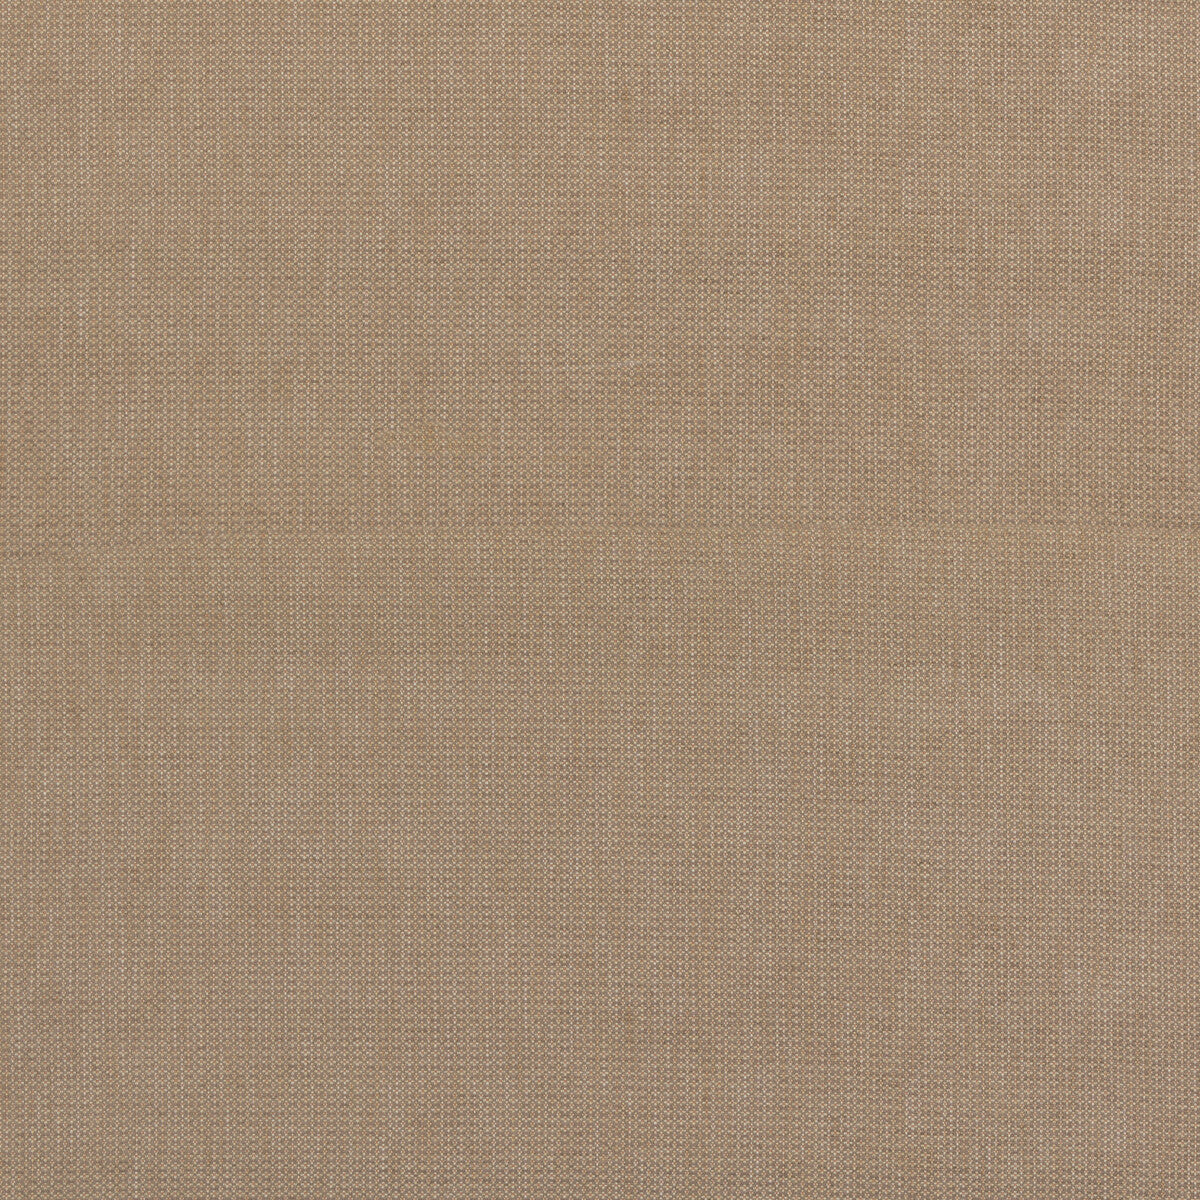 Burford Weave fabric in nutmeg color - pattern BF11035.6.0 - by G P &amp; J Baker in the Burford Weaves collection